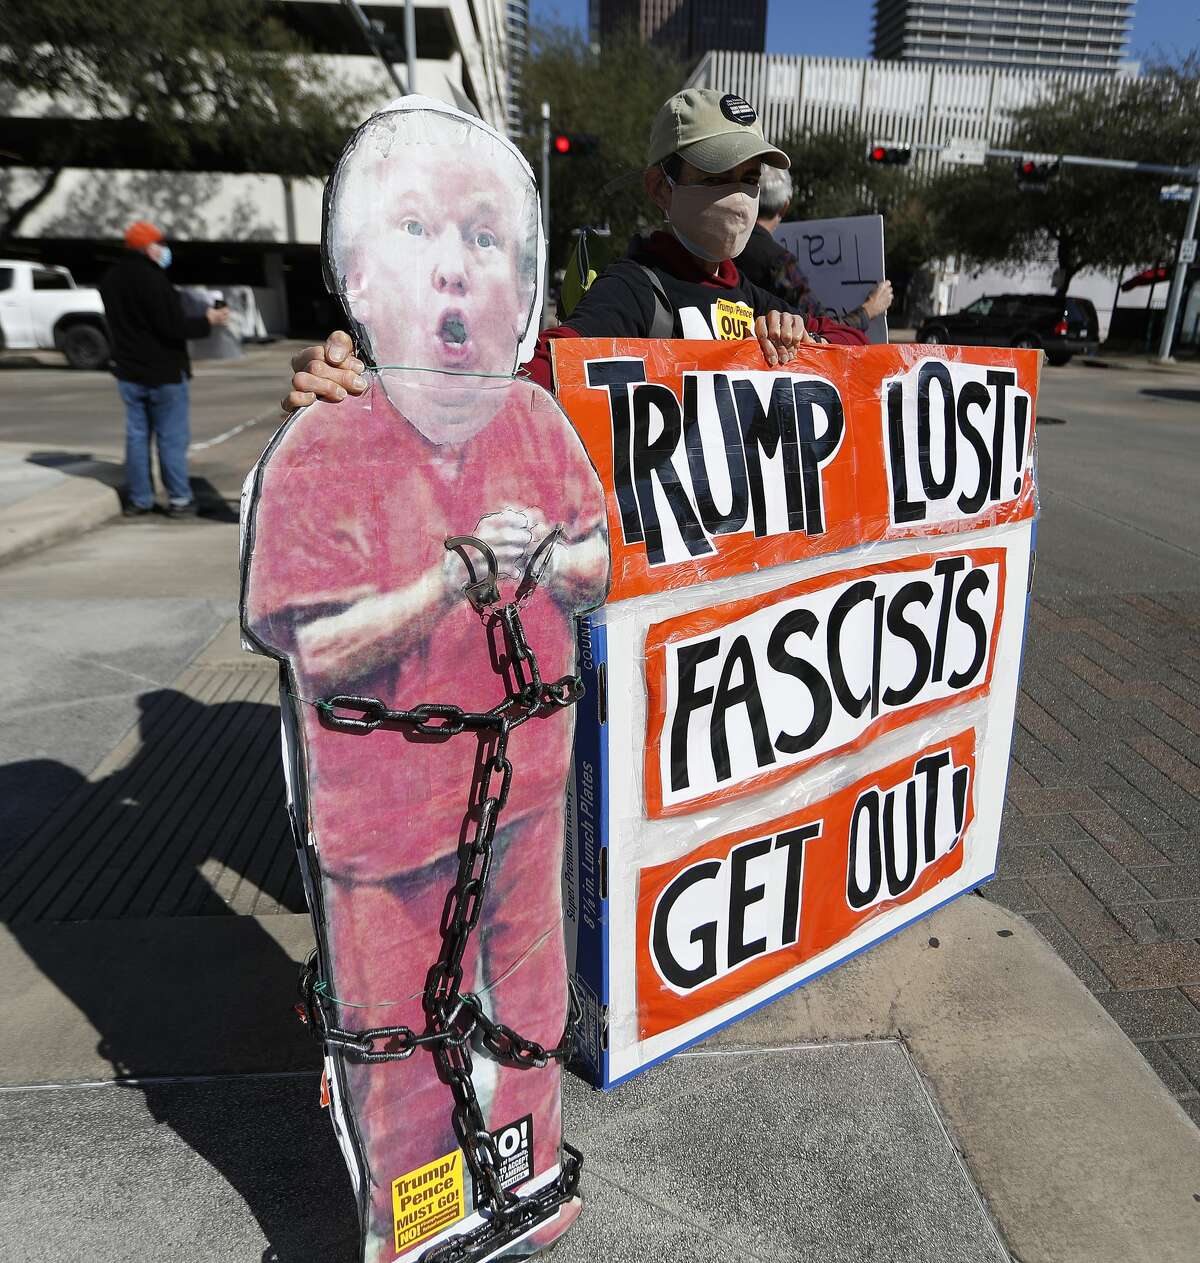 A protester holds a cardboard cutout of Donald Trump in chains as Houston activists call for Senator Ted Cruz to resign at the Leland Federal Building, Thursday, Jan. 7, 2021, in Houston.